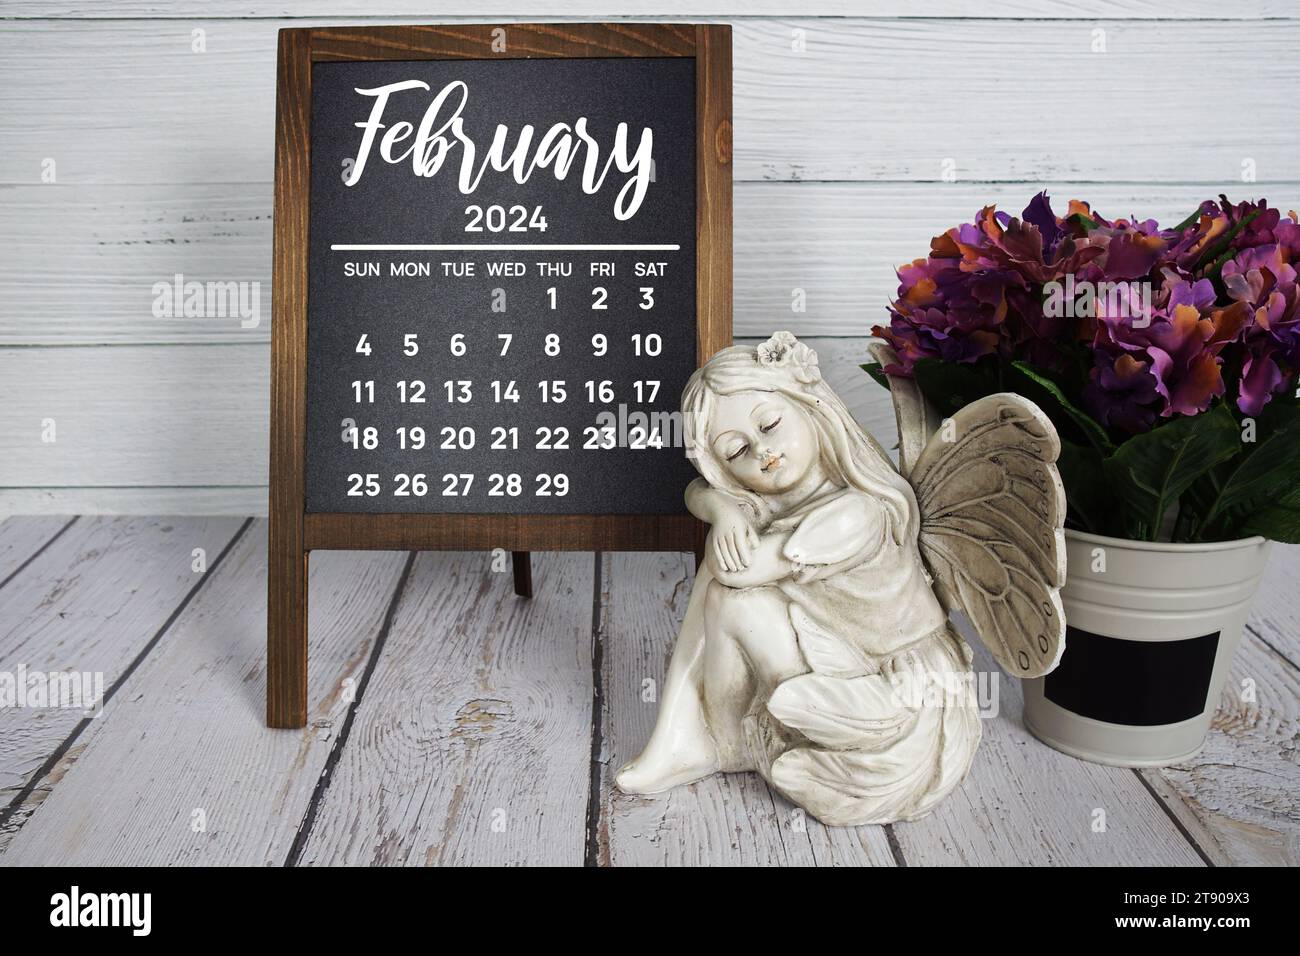 February 2024 monthly calendar with flower bouquet decoration on wooden background Stock Photo